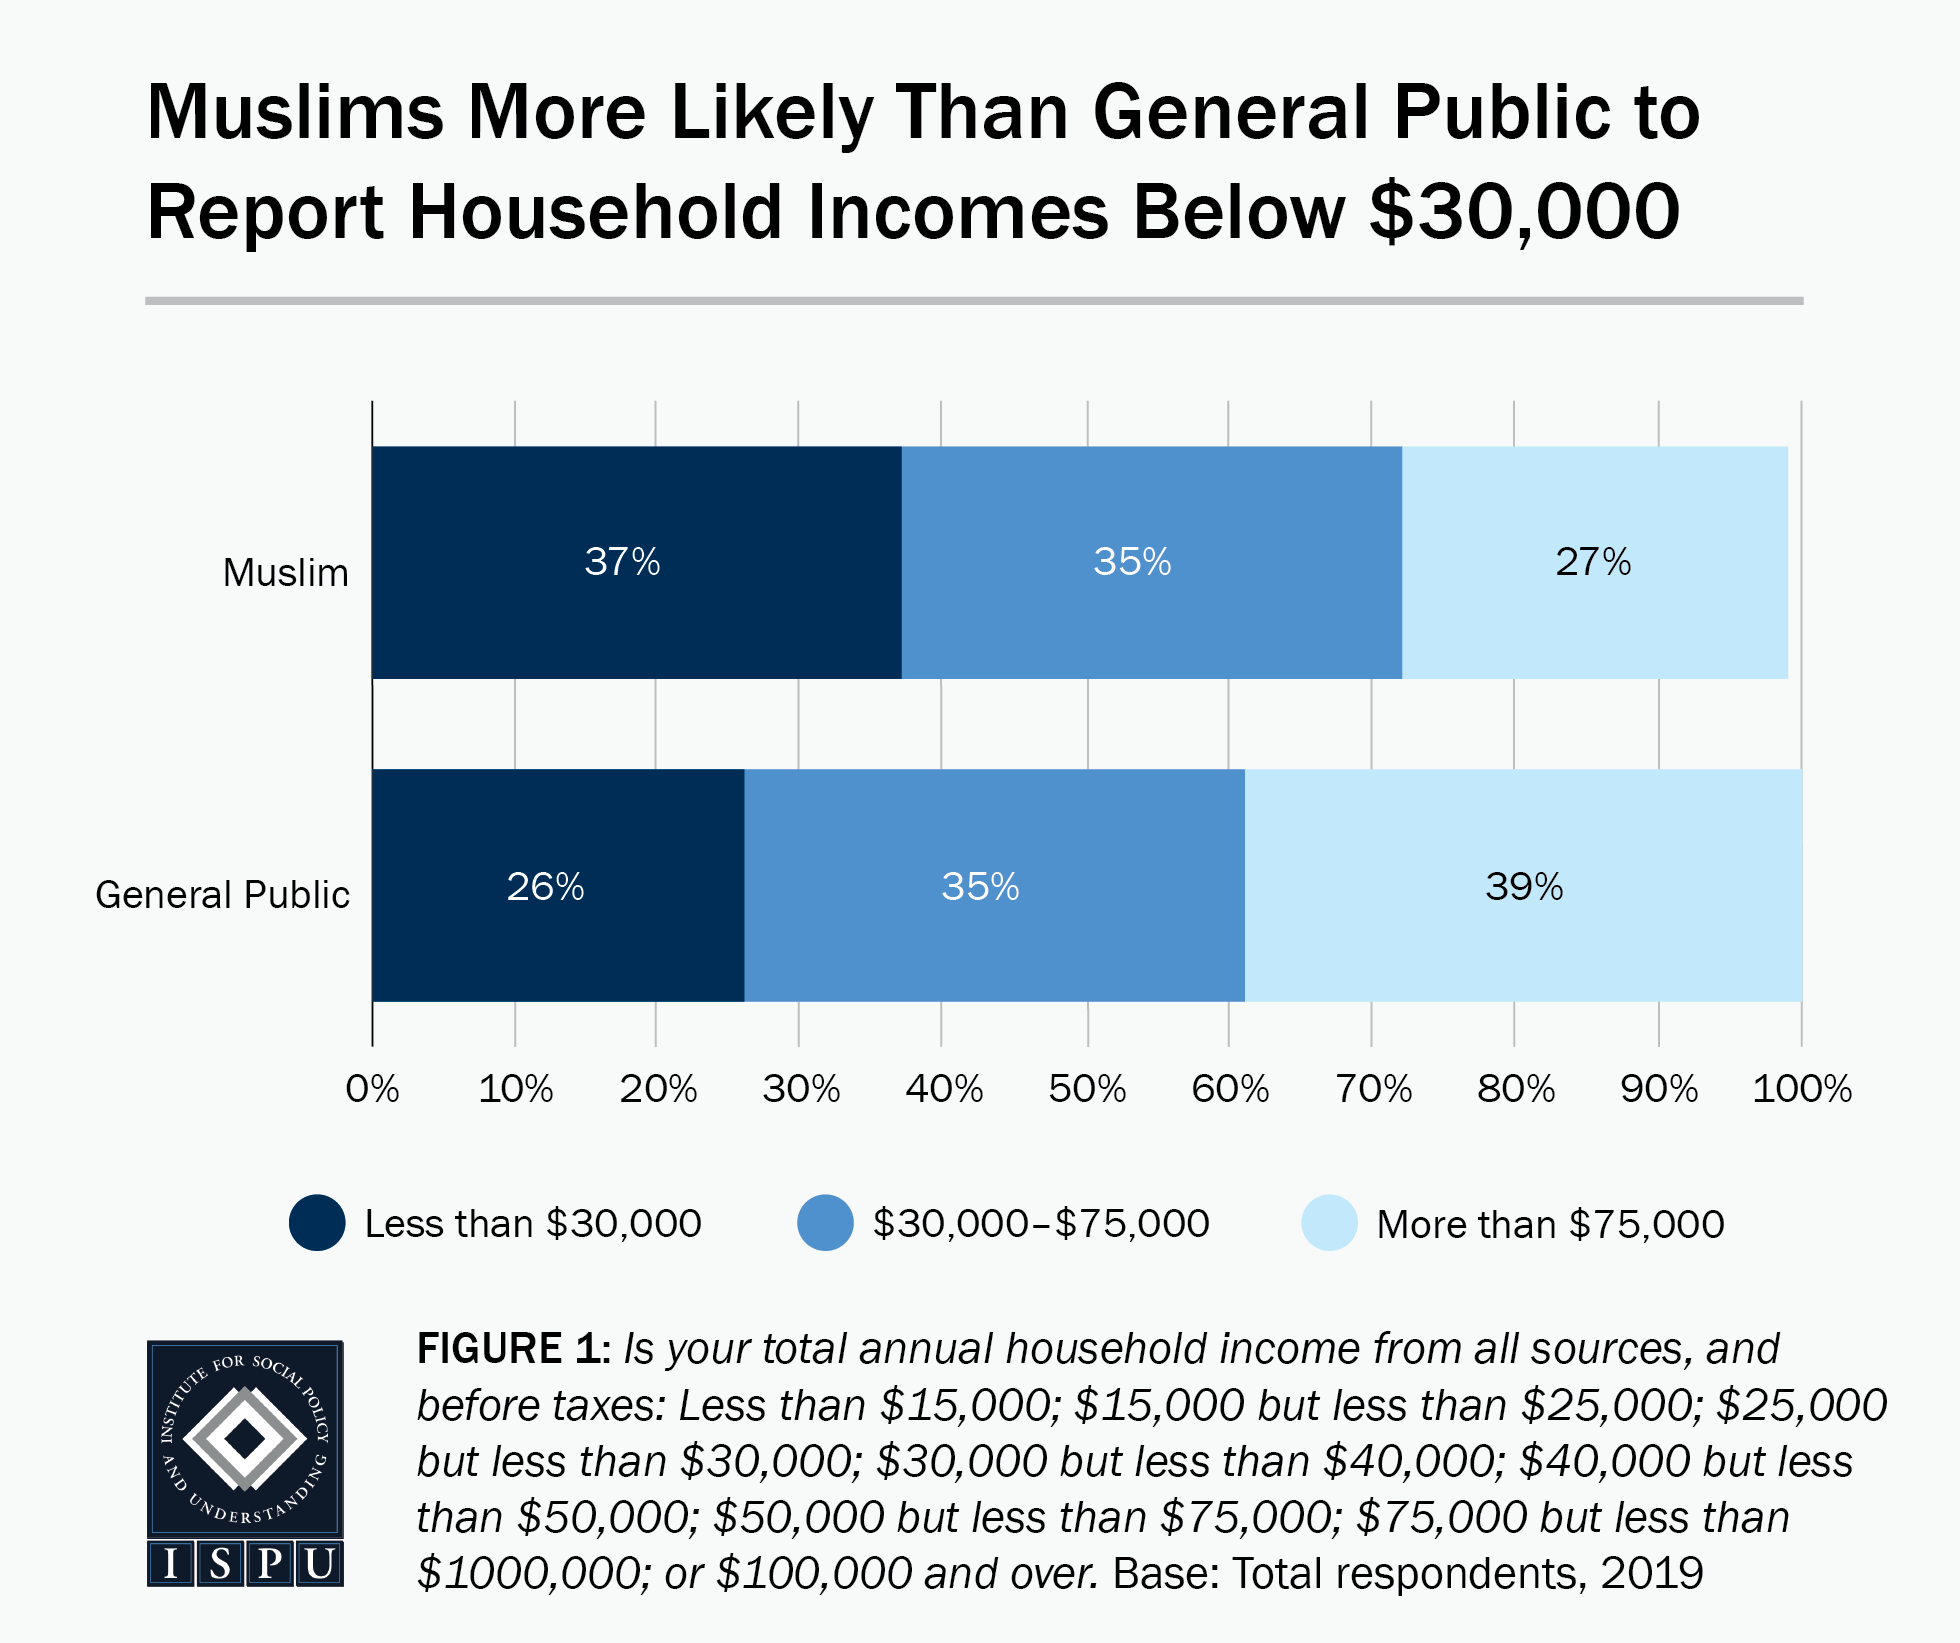 Figure 1: A bar graph showing that Muslims are more likely than the general public to report household incomes below $30,000